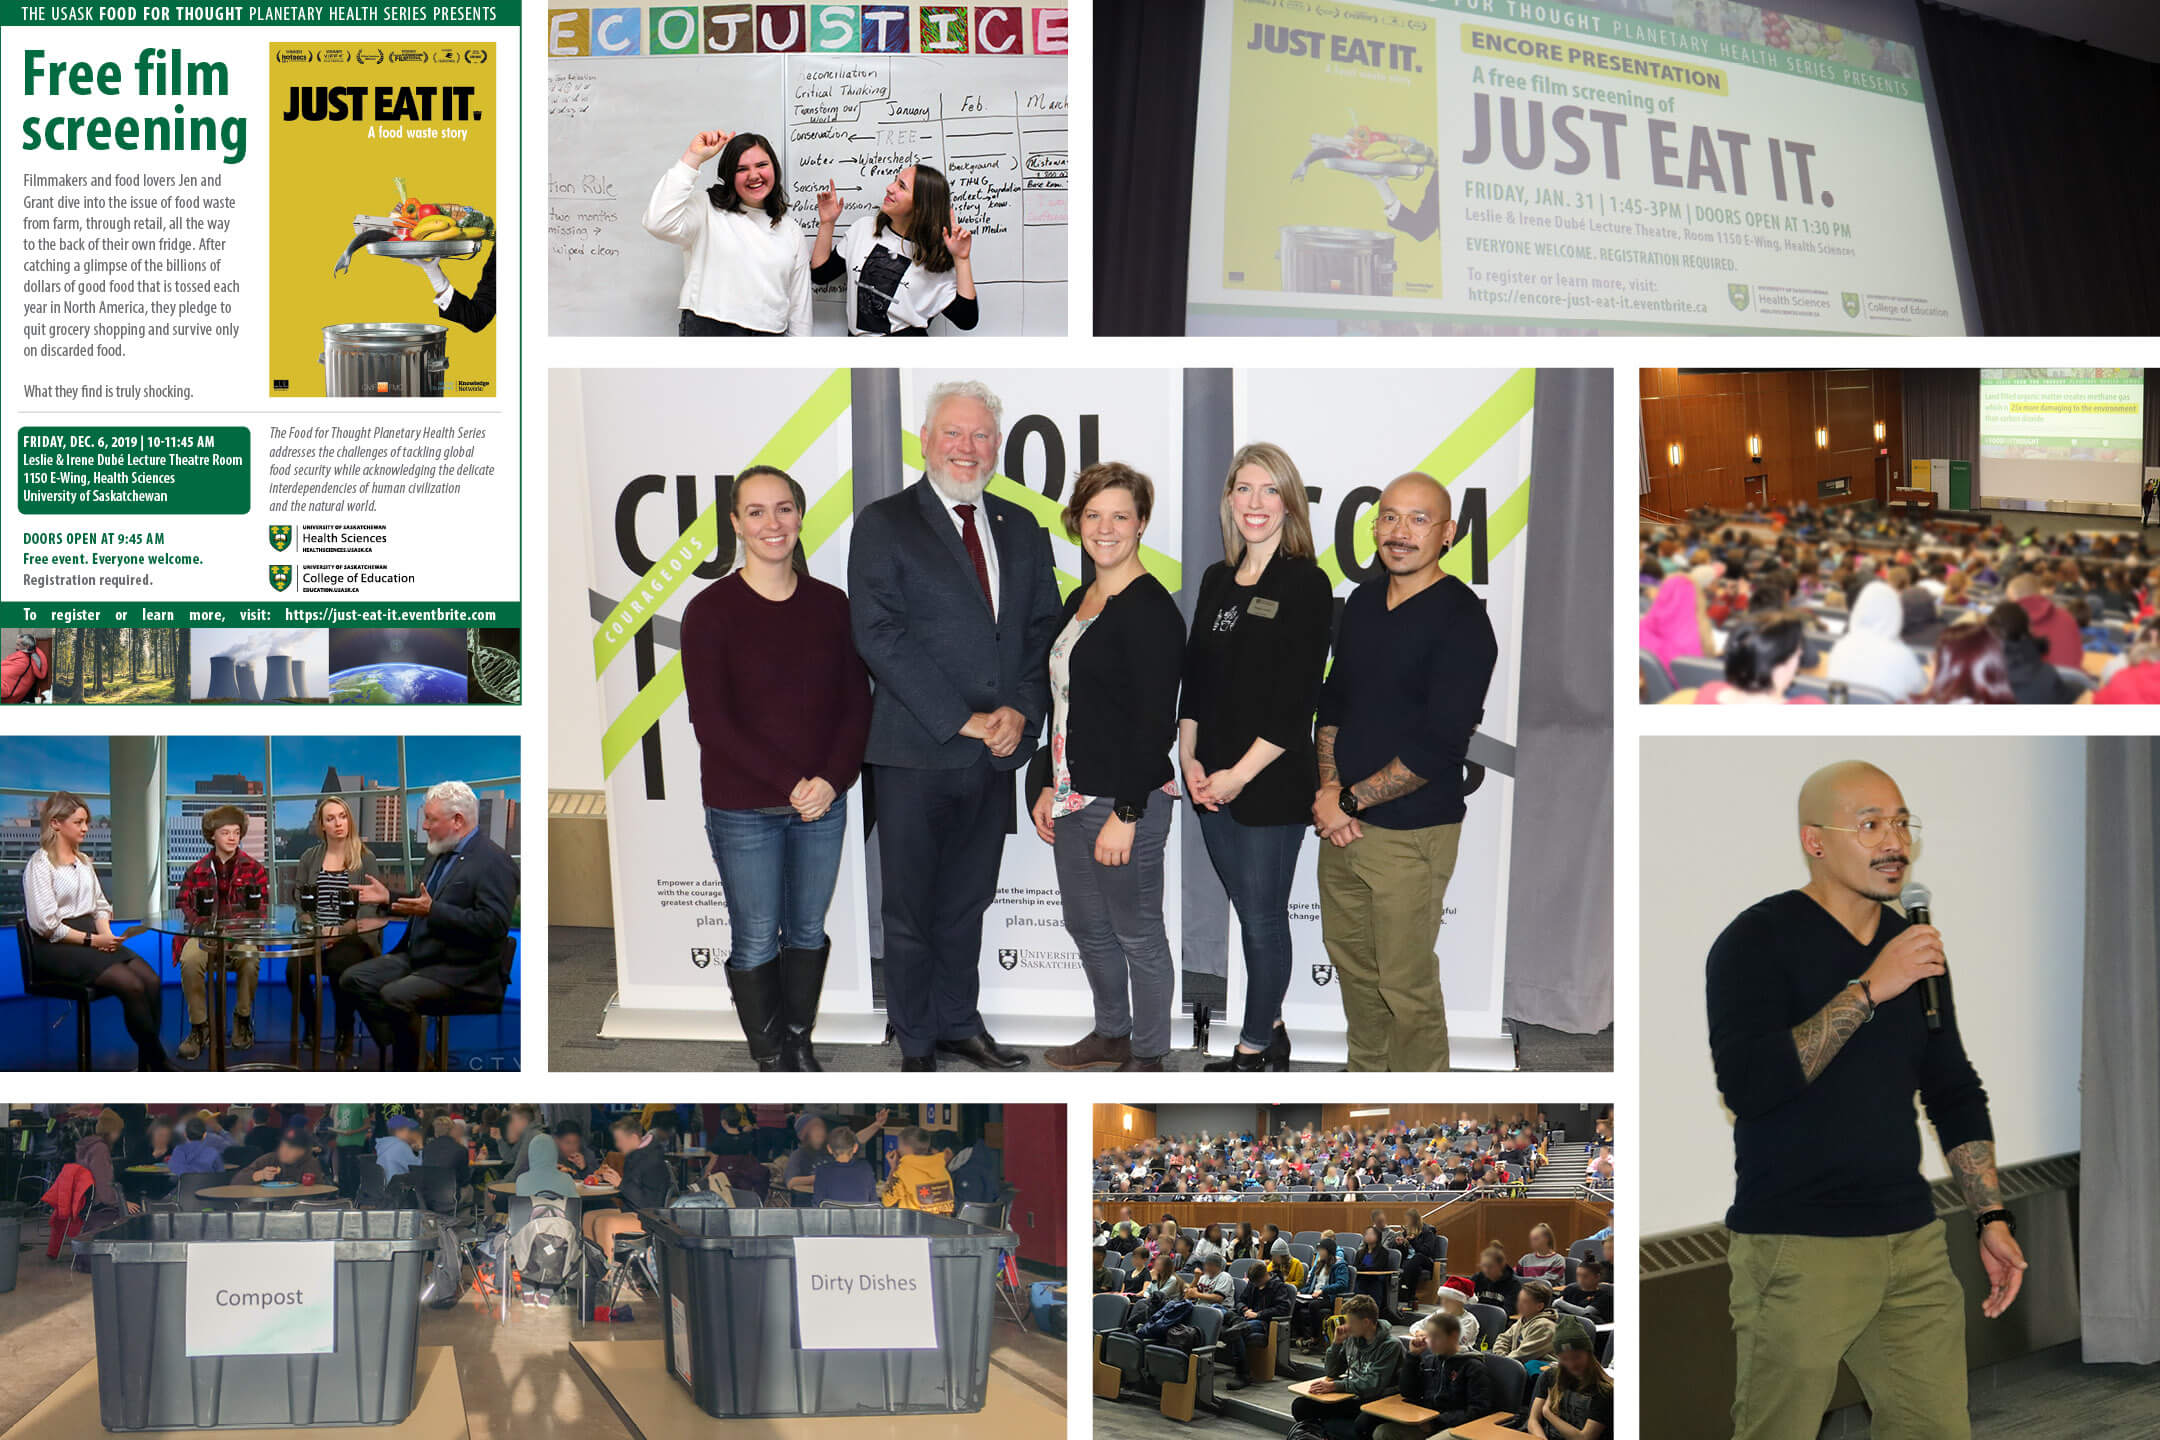 On Dec. 6, 2019, the University of Saskatchewan Health Sciences hosted a full house at a free screening of the critically acclaimed food waste documentary Just Eat It.